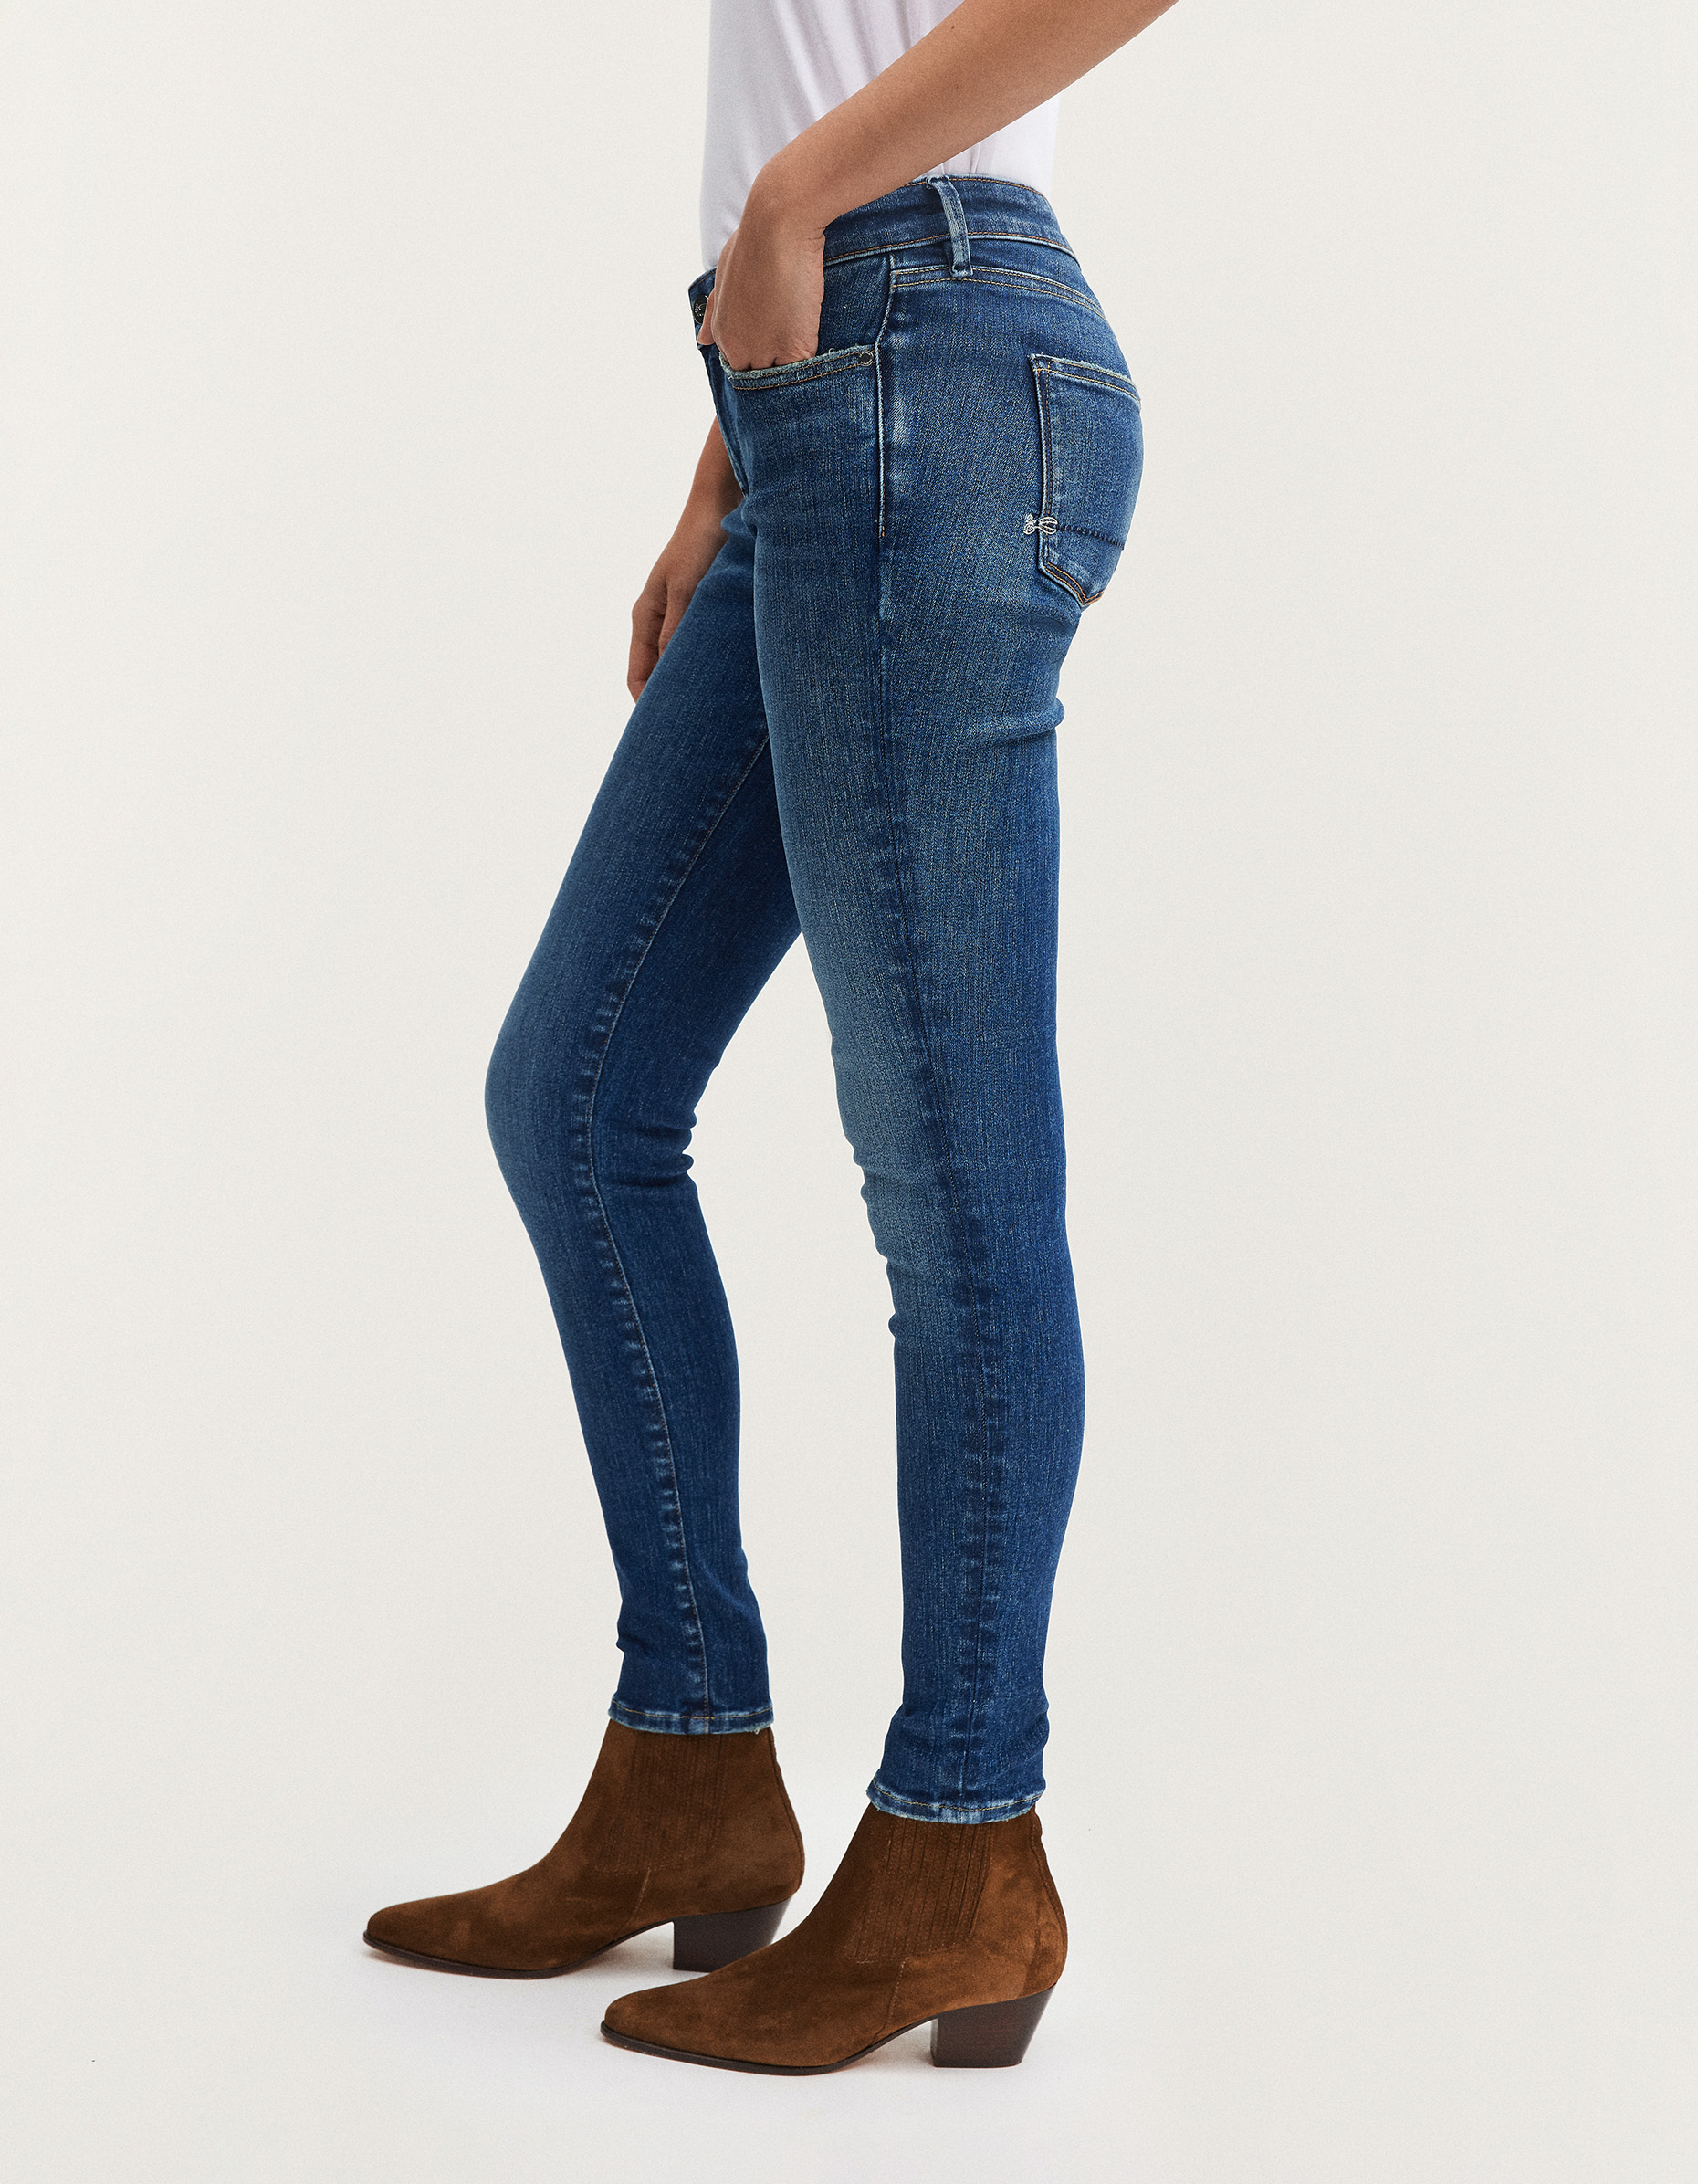 Women Jeans - Tight Fit - Spray